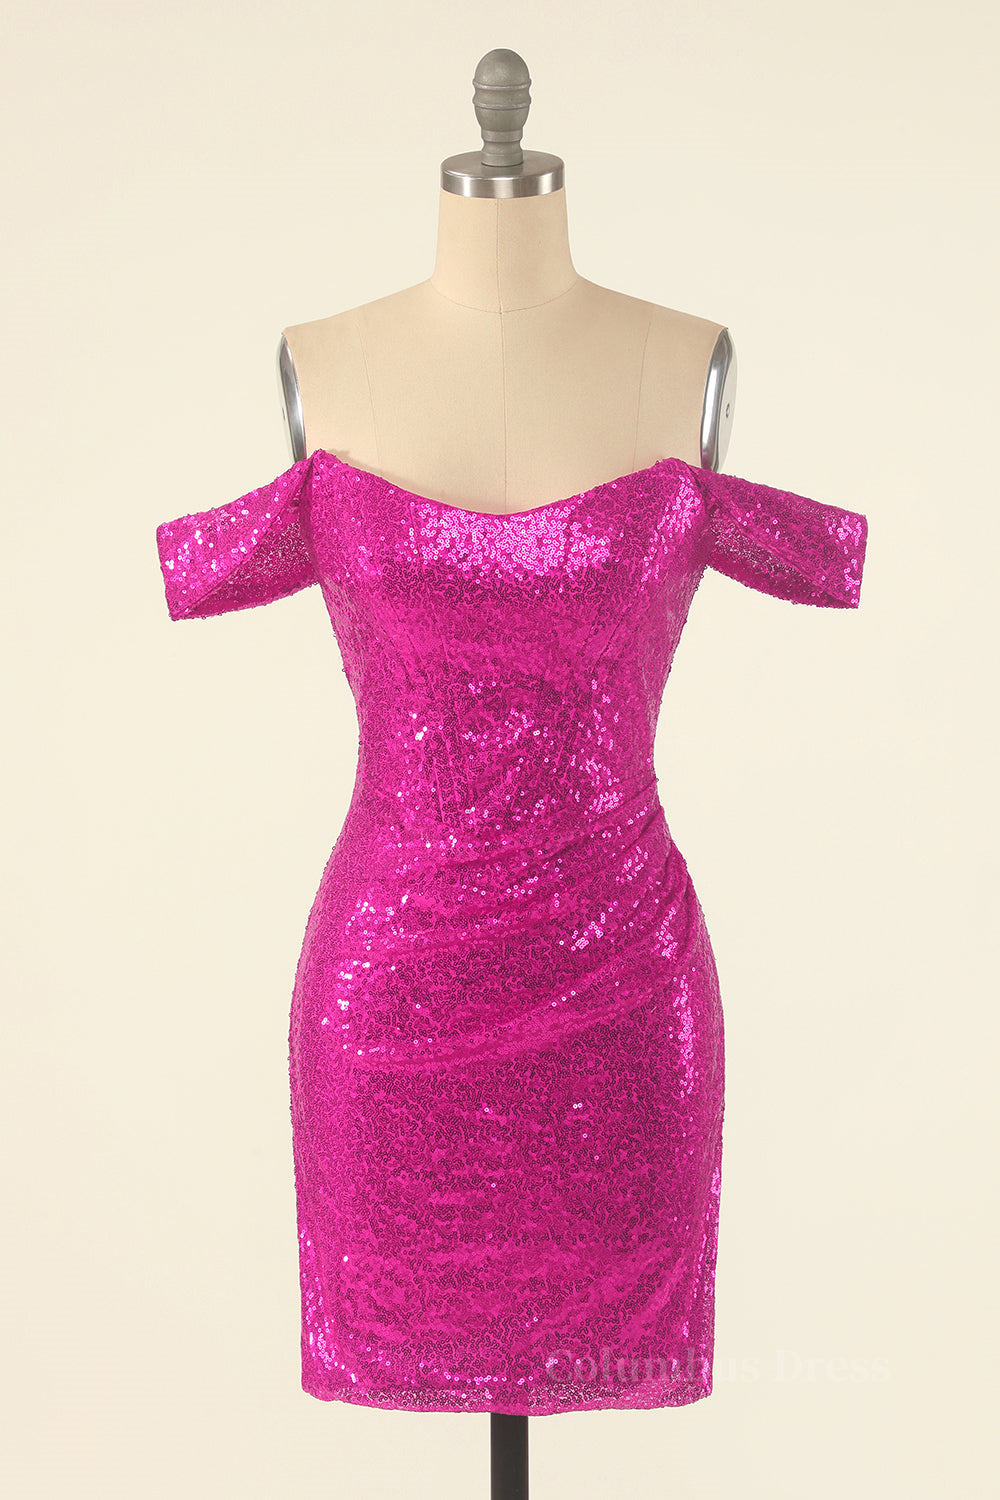 Party Dress After Wedding, Fuchsia Off the Shoulder Sequin Party Mini Dress